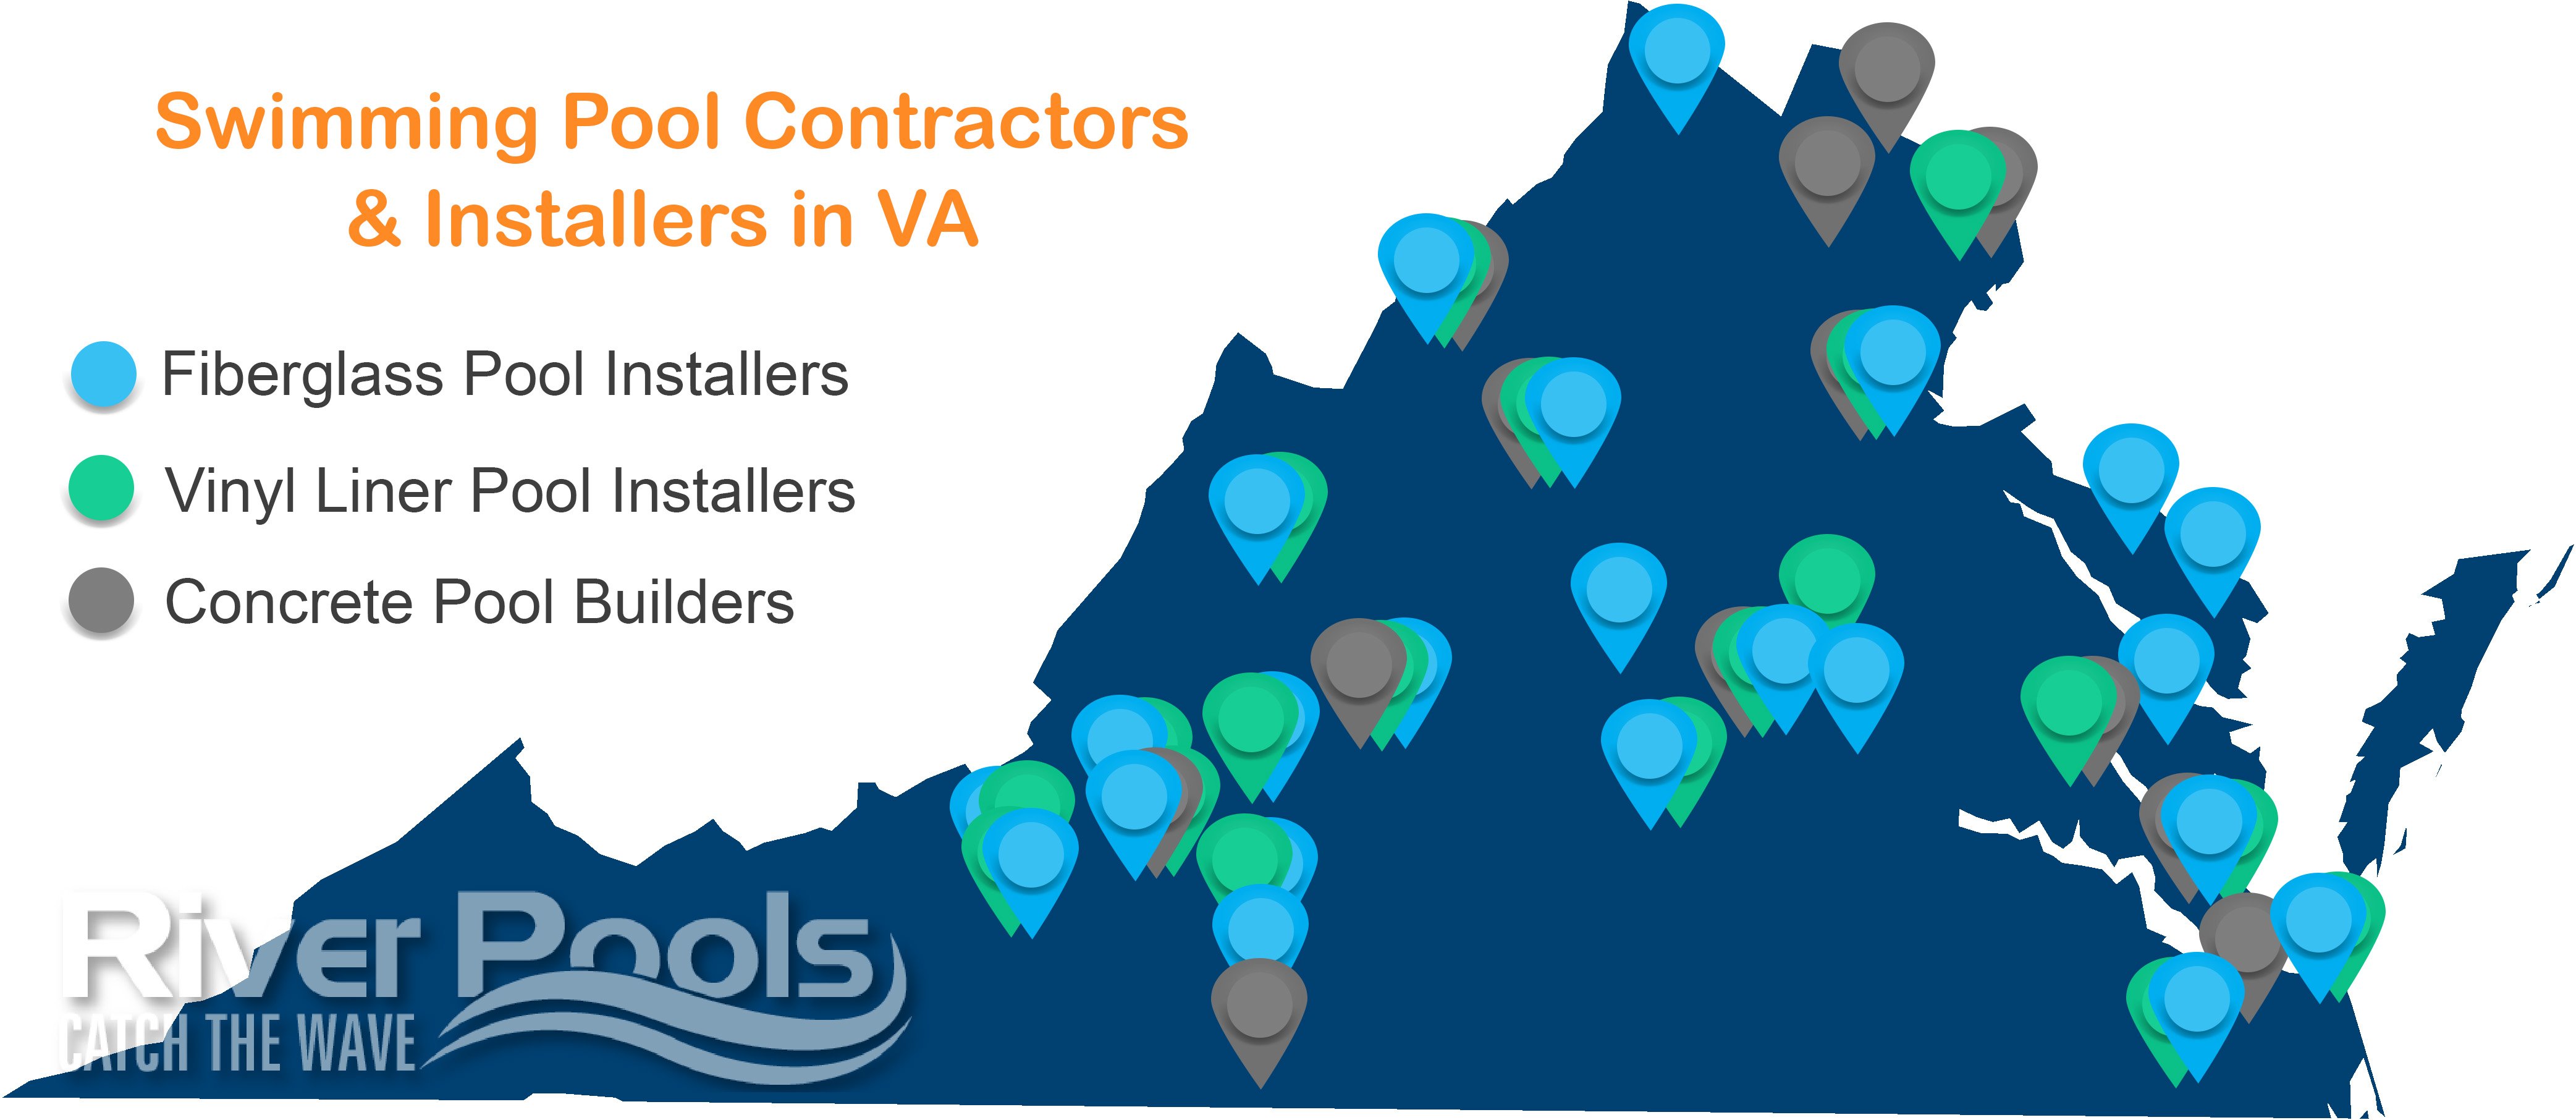 Virginia swimming pool contractors and installers map